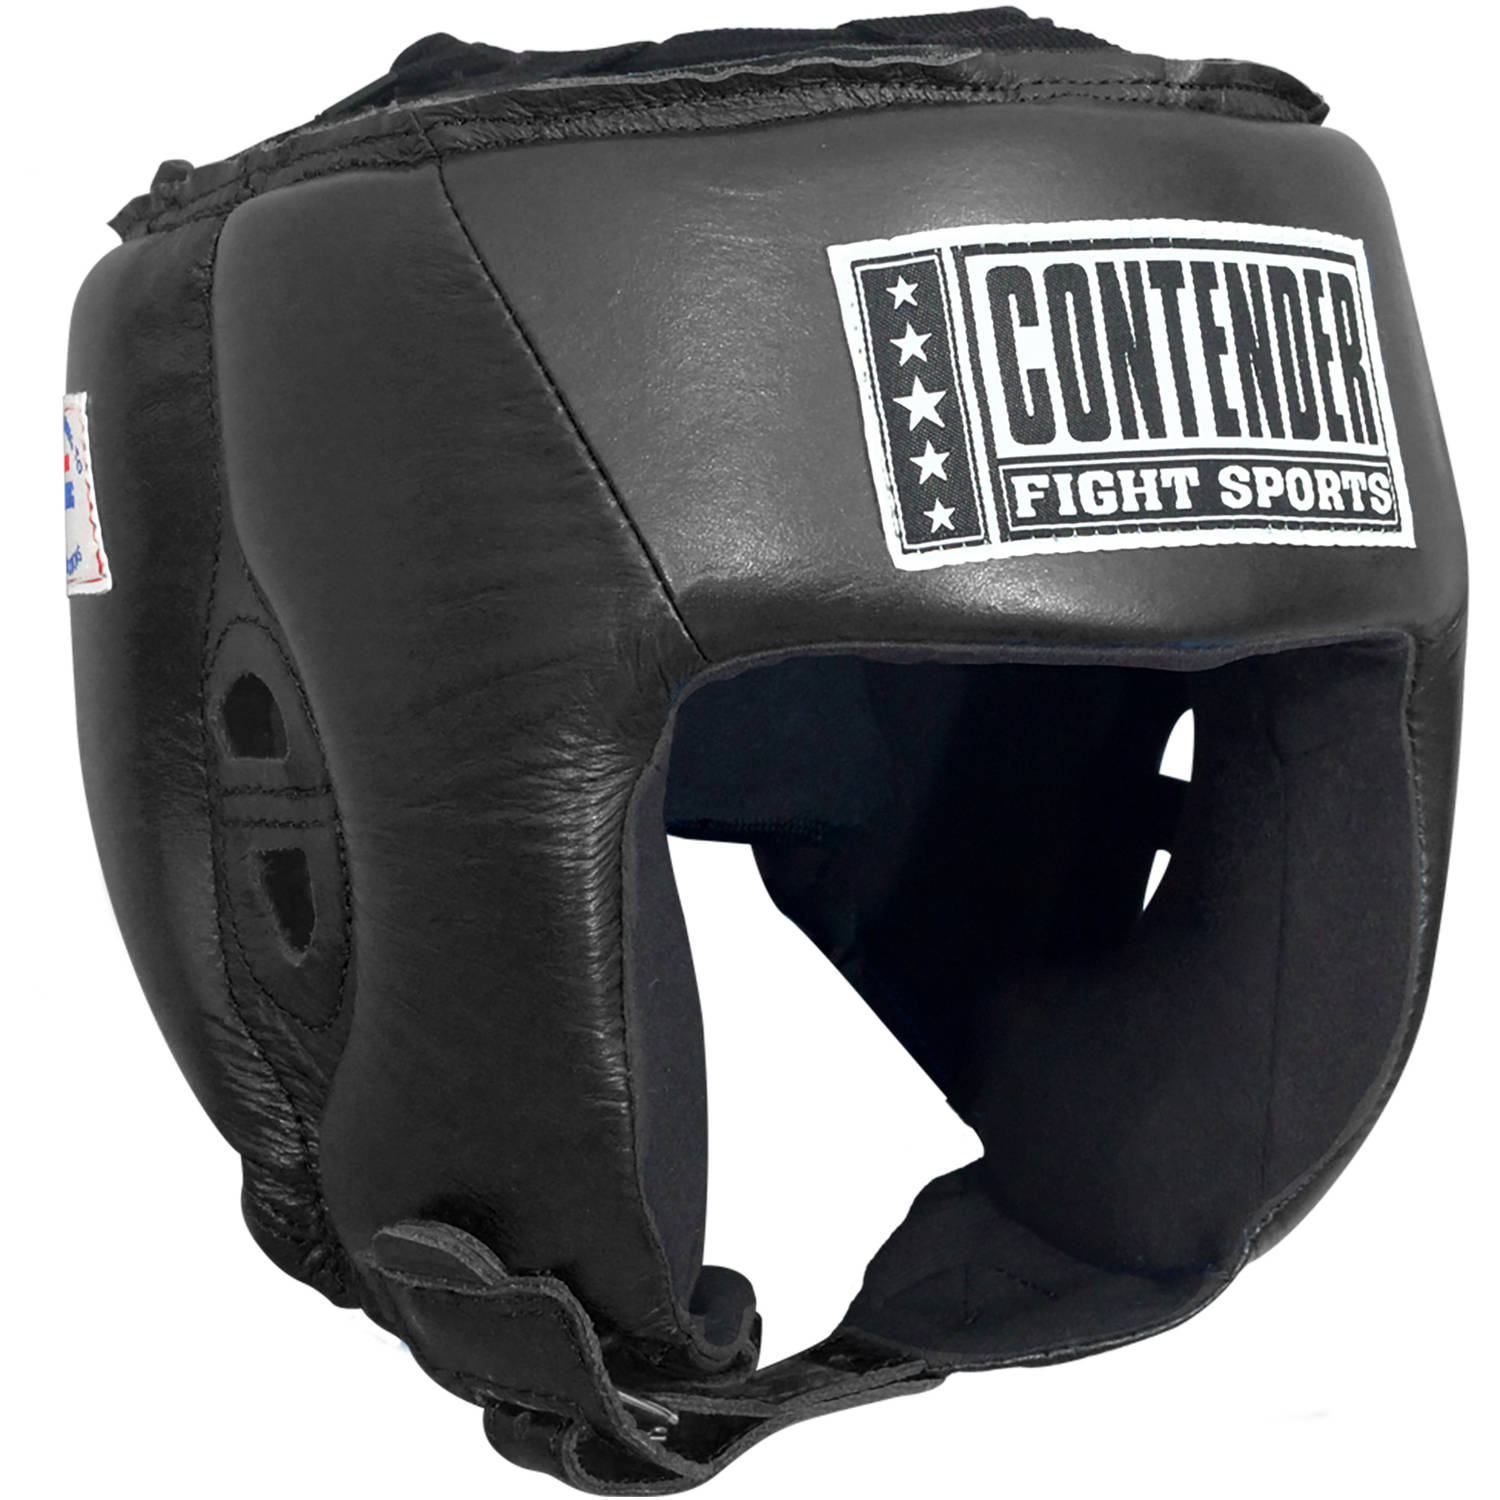 Contender Fight Sports Competition Boxing Muay Thai MMA Sparring Head Protection Headgear with Cheeks 